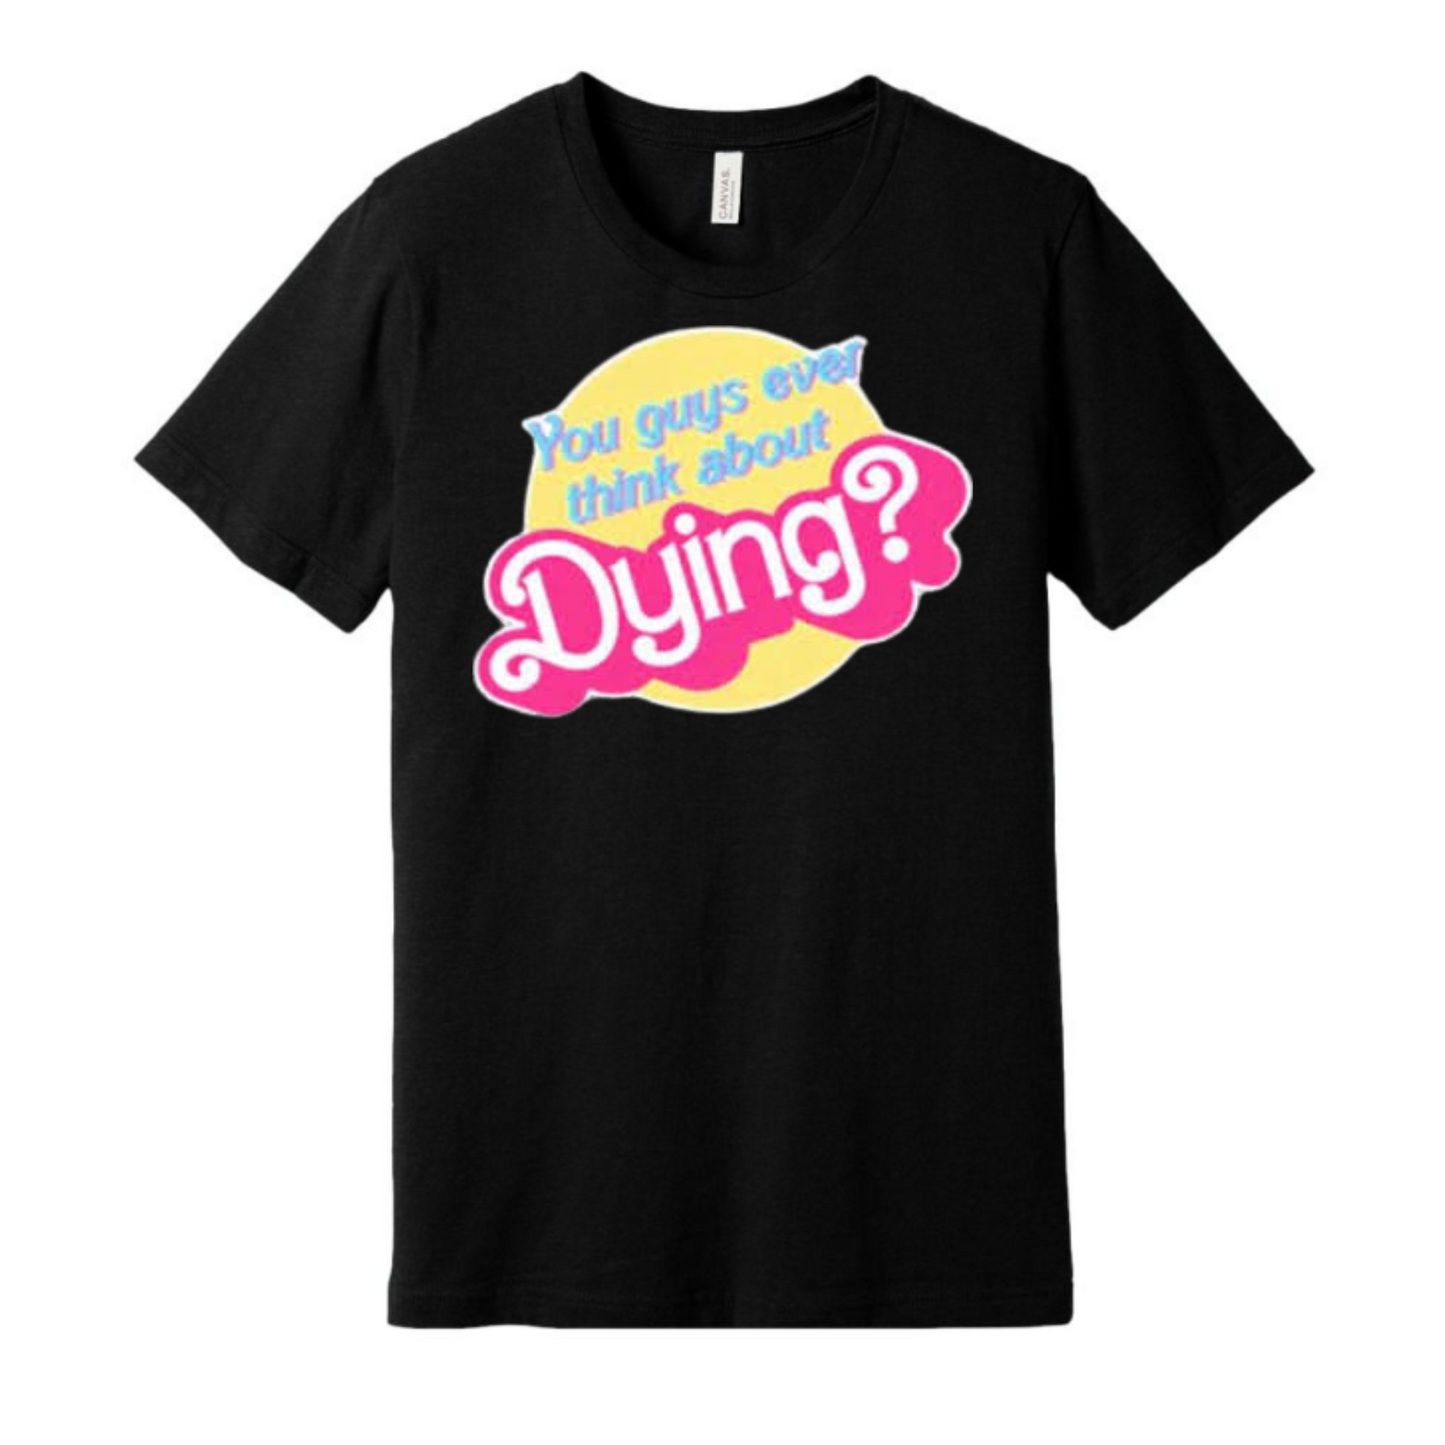 You Guys Ever Think About Dying? Shirt